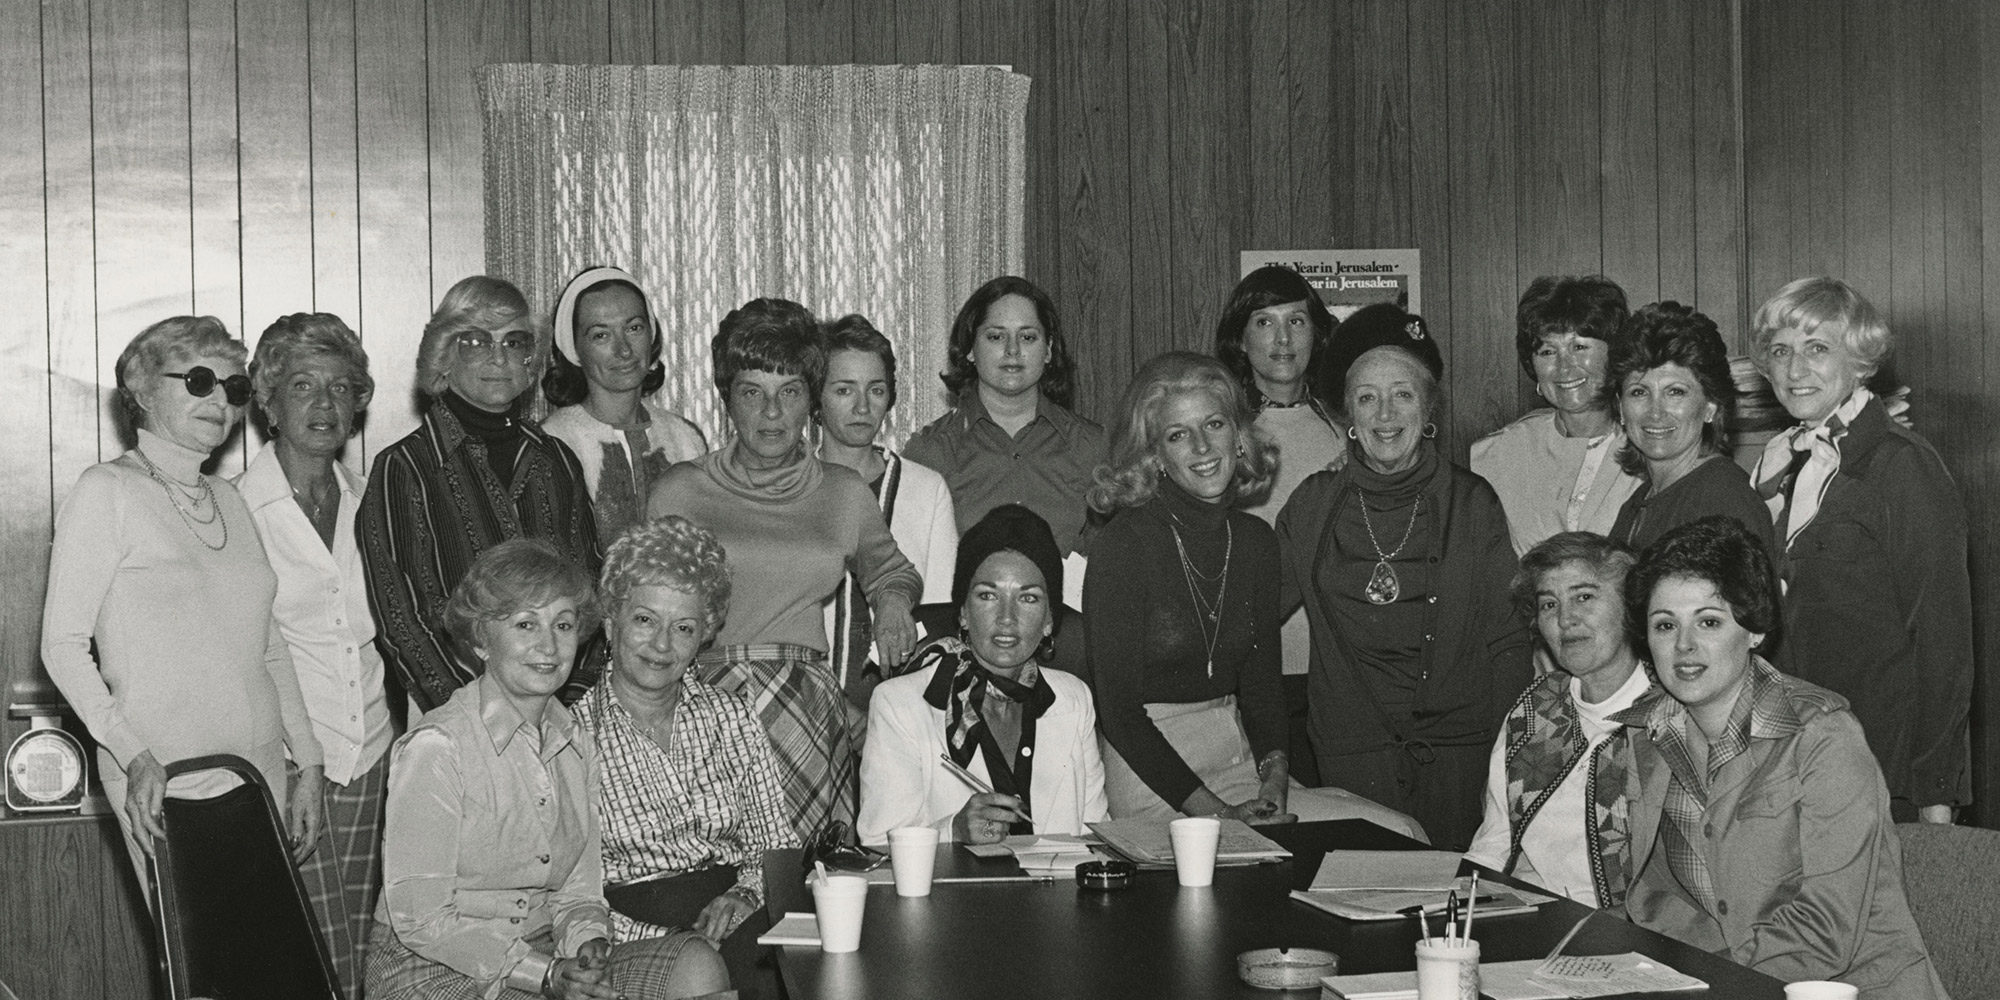 Cabinet of the Jewish Federation of Las Vegas Women's Division, 1978. Jewish Federation of Las Vegas Records. UNLV Special Collections.